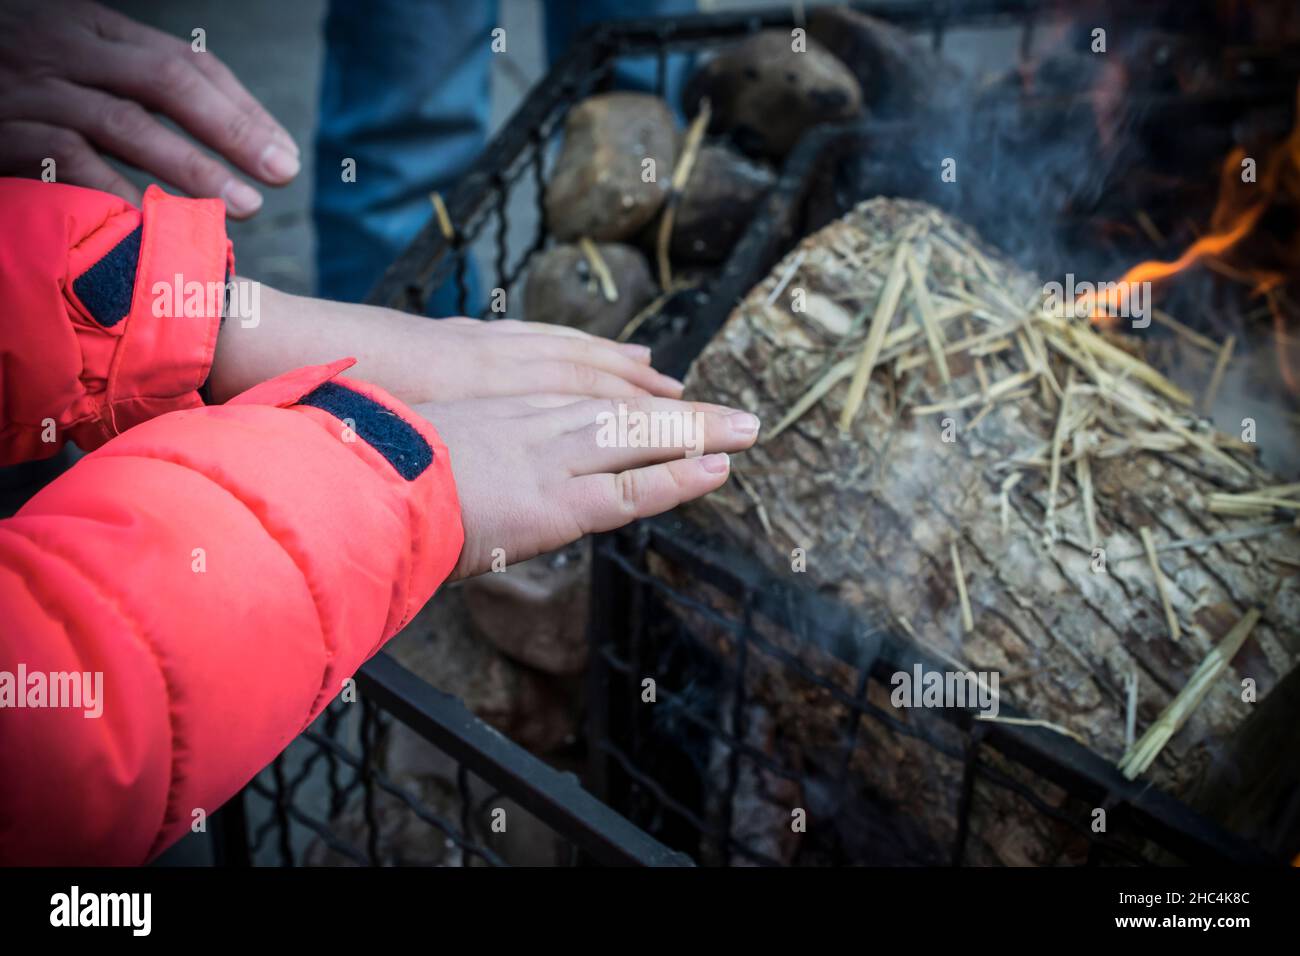 A kid warming hands over a fire during winter Stock Photo